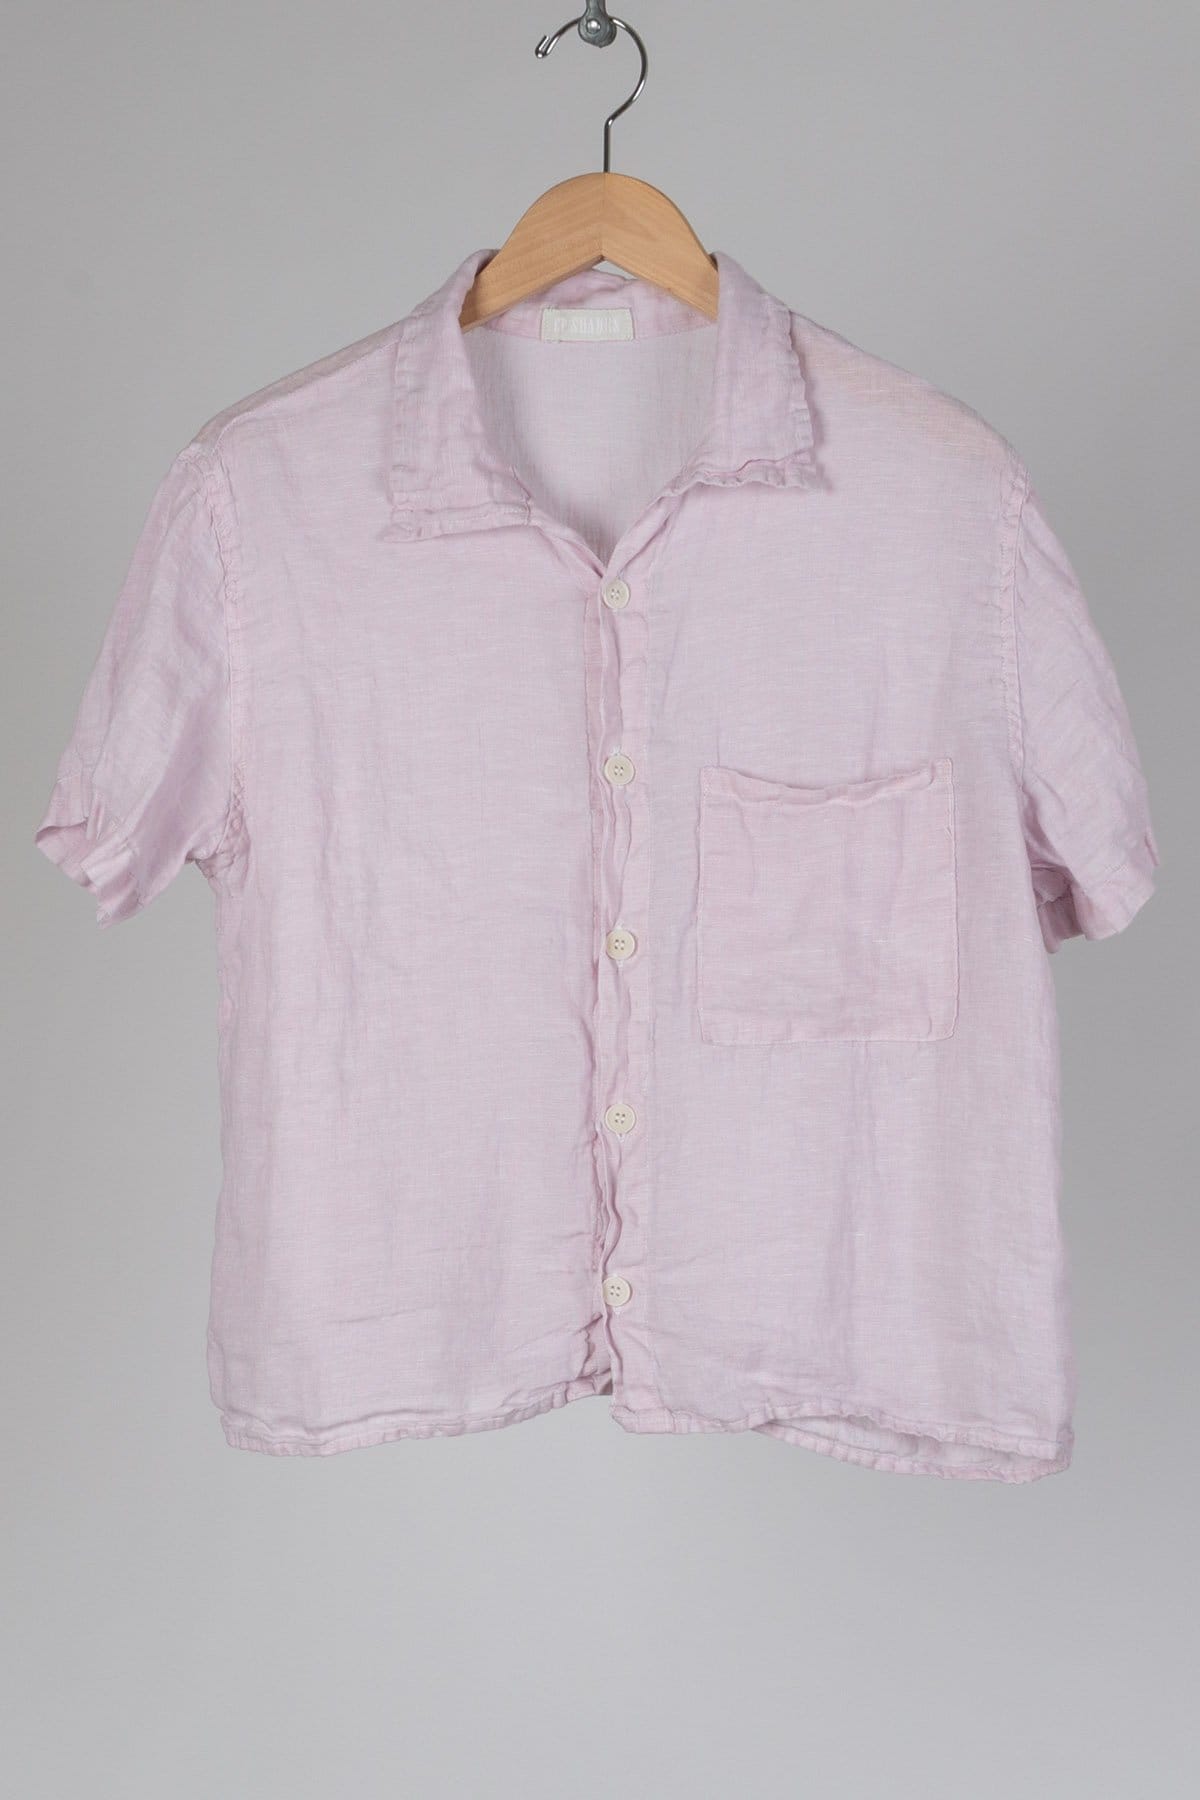 linen shirt Collared camp shirt with a square front pocket and longer short sleeves